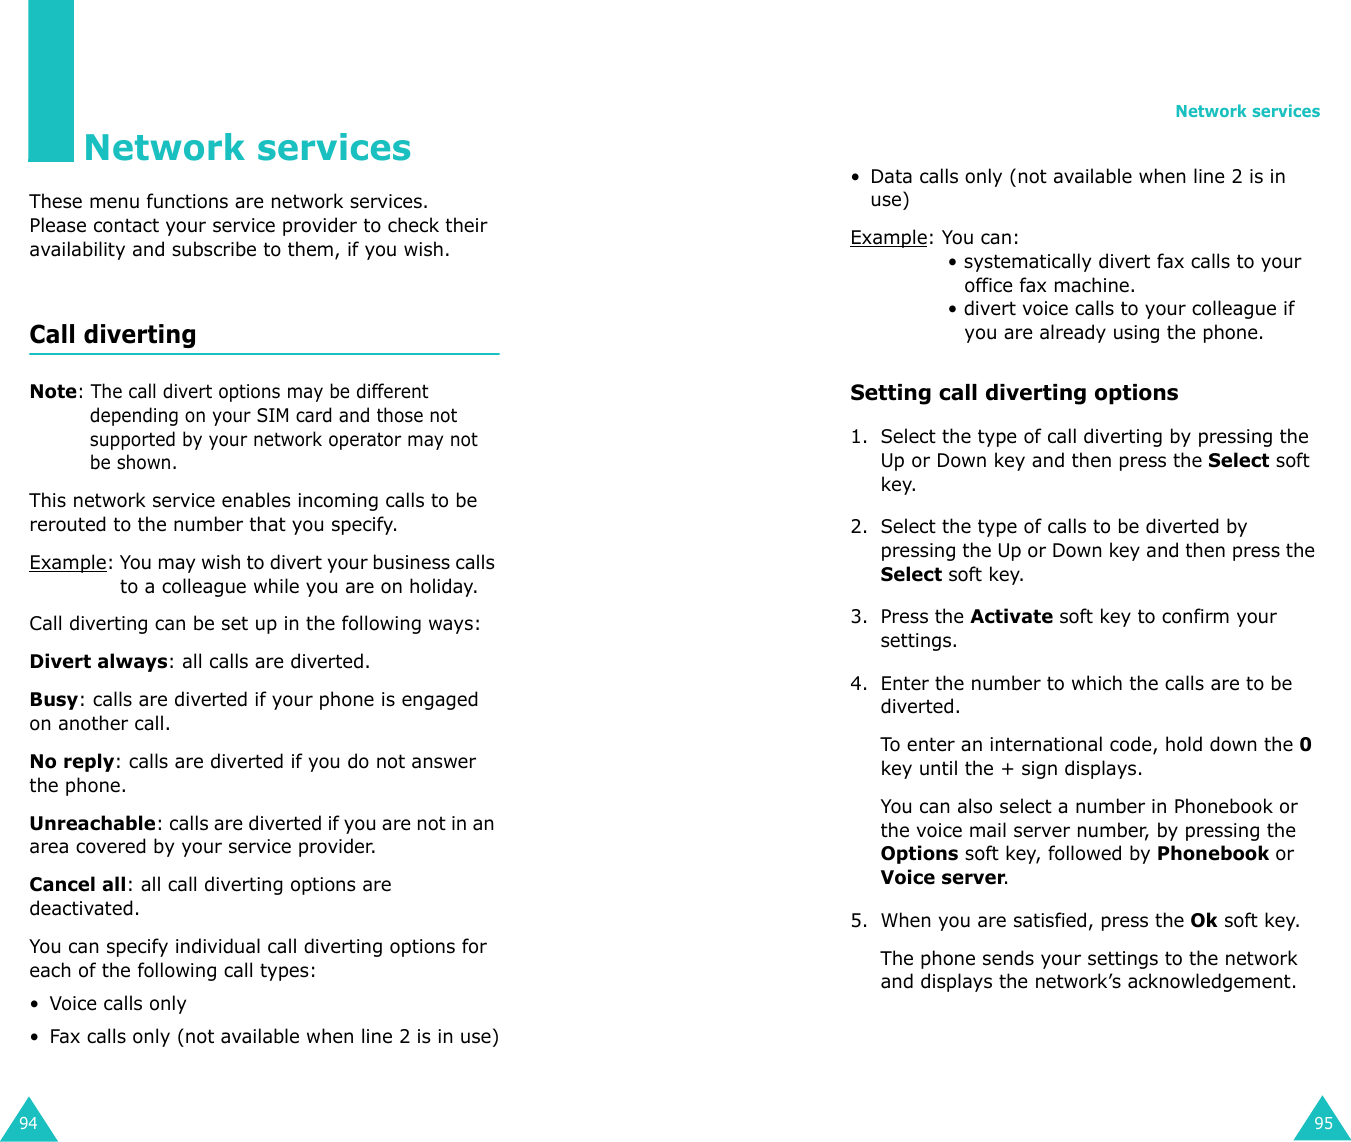 94Network servicesThese menu functions are network services.Please contact your service provider to check their availability and subscribe to them, if you wish.Call diverting Note: The call divert options may be different depending on your SIM card and those not supported by your network operator may not be shown.This network service enables incoming calls to be rerouted to the number that you specify.Example: You may wish to divert your business calls to a colleague while you are on holiday.Call diverting can be set up in the following ways:Divert always: all calls are diverted.Busy: calls are diverted if your phone is engaged on another call.No reply: calls are diverted if you do not answer the phone.Unreachable: calls are diverted if you are not in an area covered by your service provider.Cancel all: all call diverting options are deactivated.You can specify individual call diverting options for each of the following call types:• Voice calls only• Fax calls only (not available when line 2 is in use)Network services95• Data calls only (not available when line 2 is in use)Example: You can:• systematically divert fax calls to your office fax machine.• divert voice calls to your colleague if you are already using the phone.Setting call diverting options1. Select the type of call diverting by pressing the Up or Down key and then press the Select soft key.2. Select the type of calls to be diverted by pressing the Up or Down key and then press the Select soft key.3. Press the Activate soft key to confirm your settings.4. Enter the number to which the calls are to be diverted.To enter an international code, hold down the 0 key until the + sign displays. You can also select a number in Phonebook or the voice mail server number, by pressing the Options soft key, followed by Phonebook or Voice server.5. When you are satisfied, press the Ok soft key. The phone sends your settings to the network and displays the network’s acknowledgement.